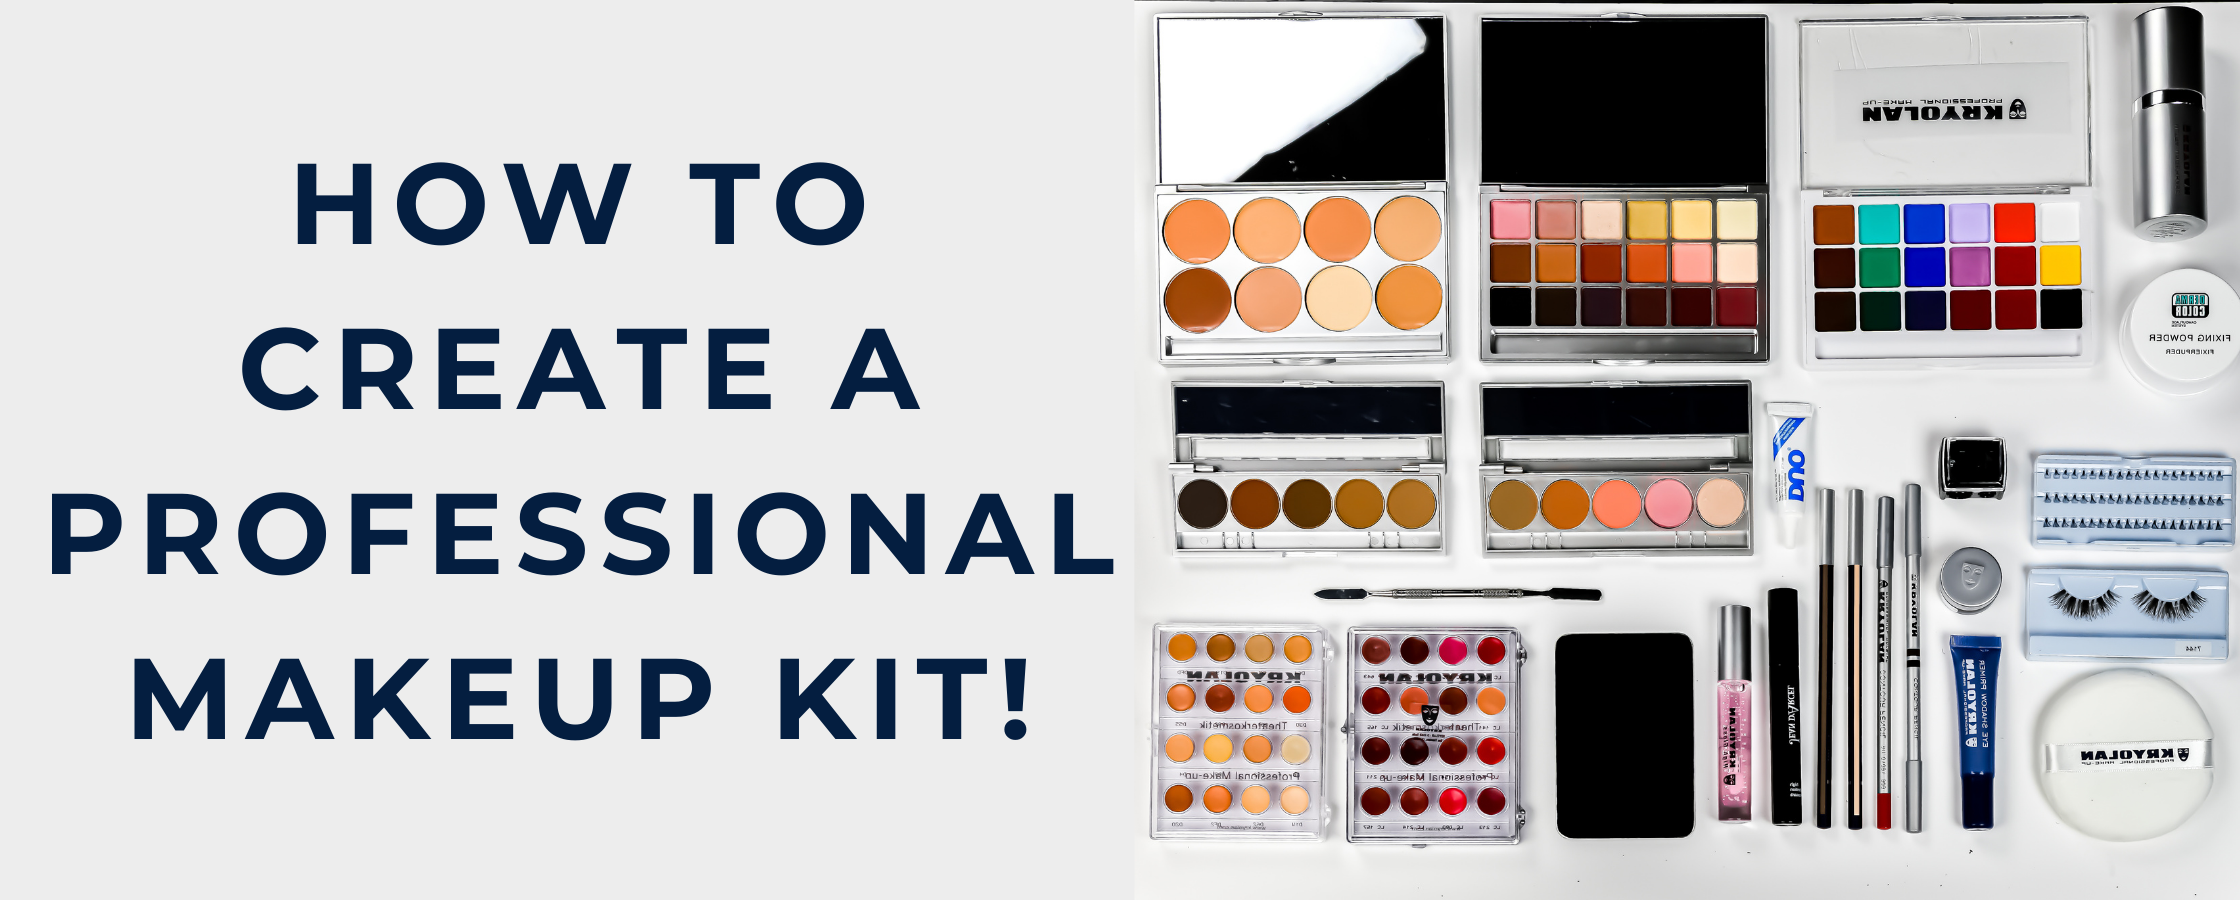 How to Create a Professional Makeup Kit!